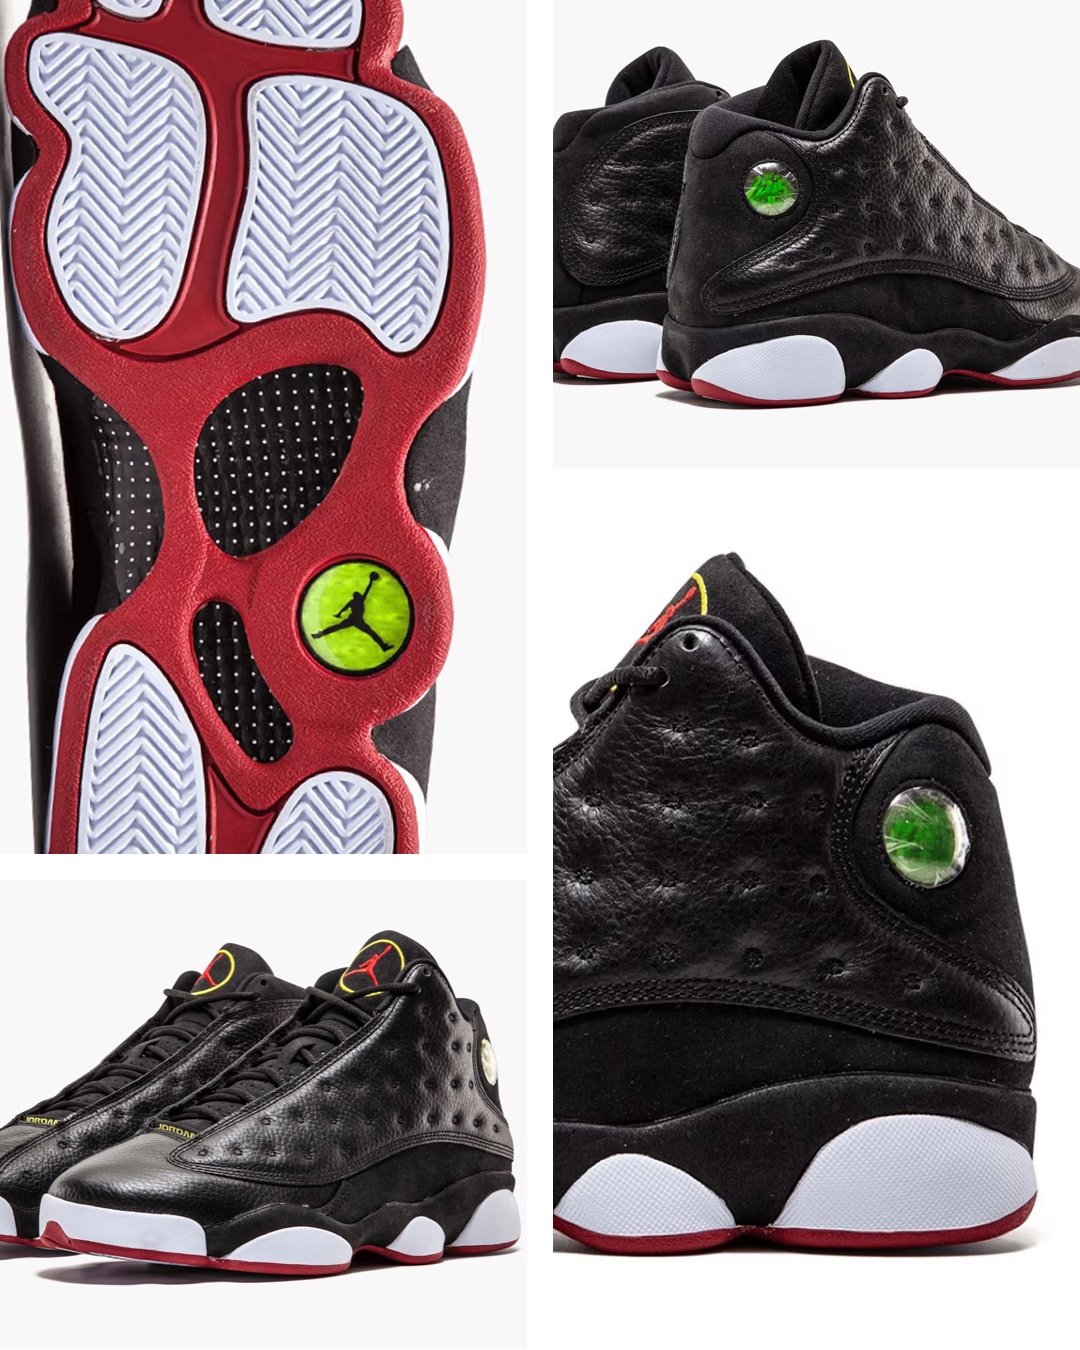 2023 Air Jordan 13 Retro "Playoffs" [Release Date And Pricing] The